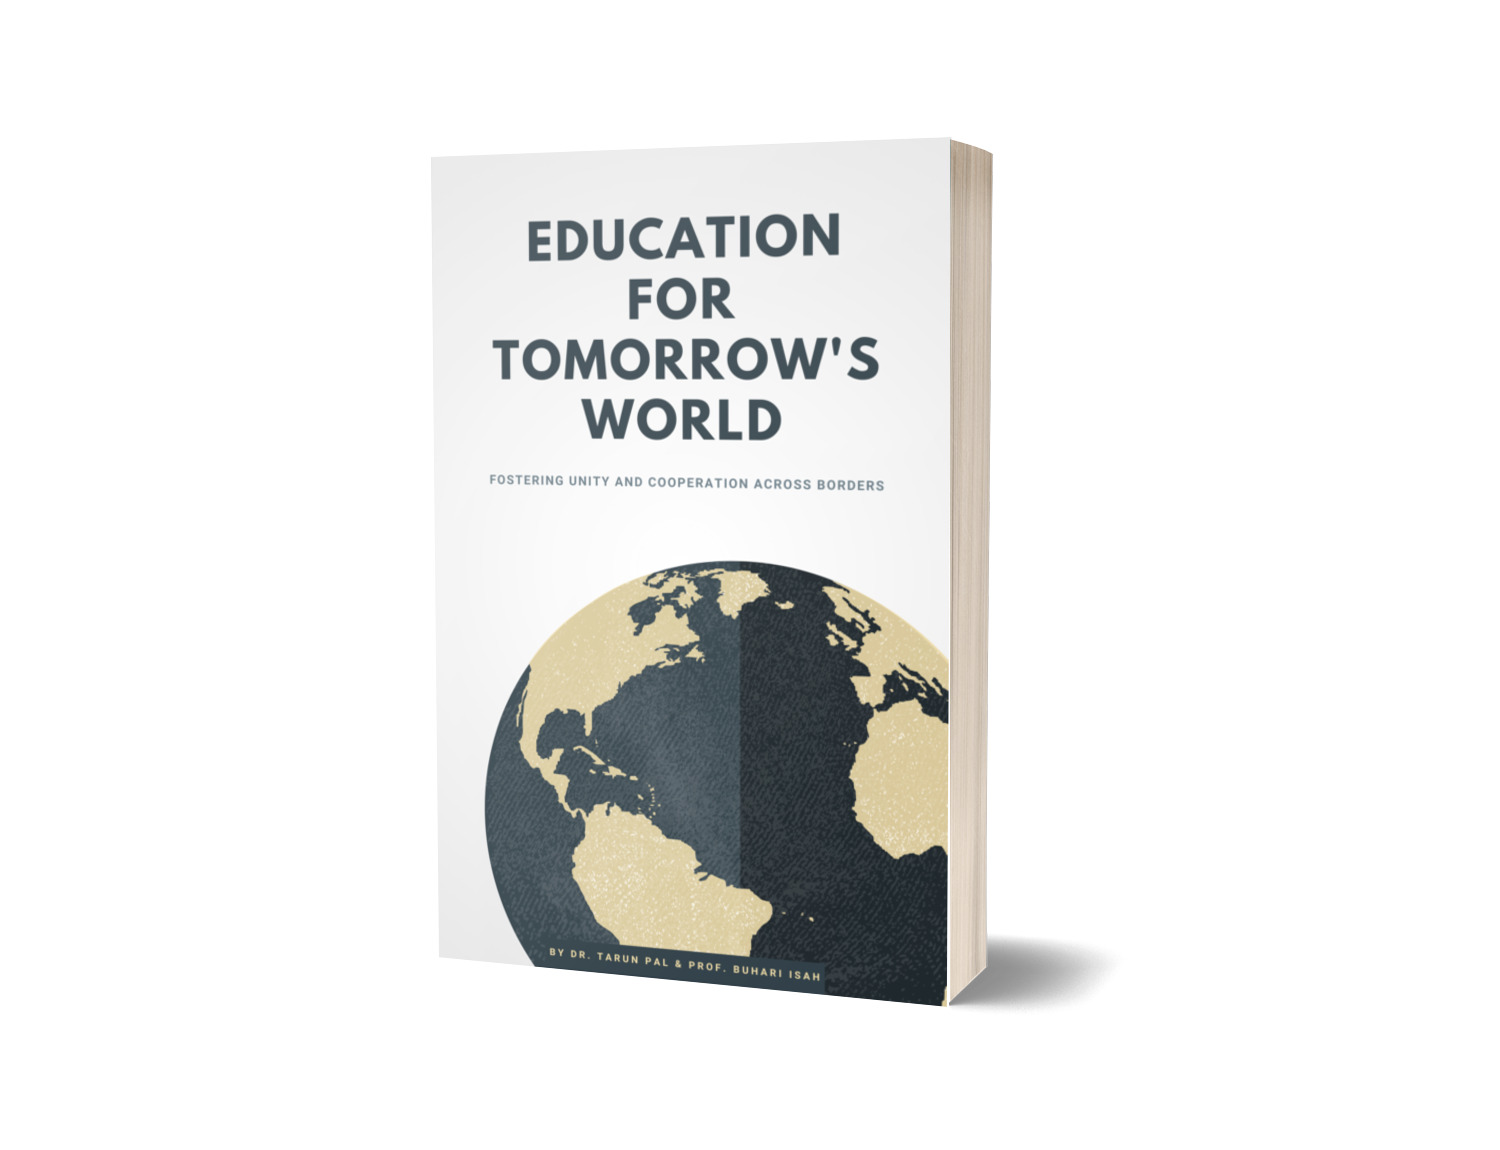 New book by Dr. Tarun Pal and Prof. Buhari Isah on education now available digitally and through multiple retailers